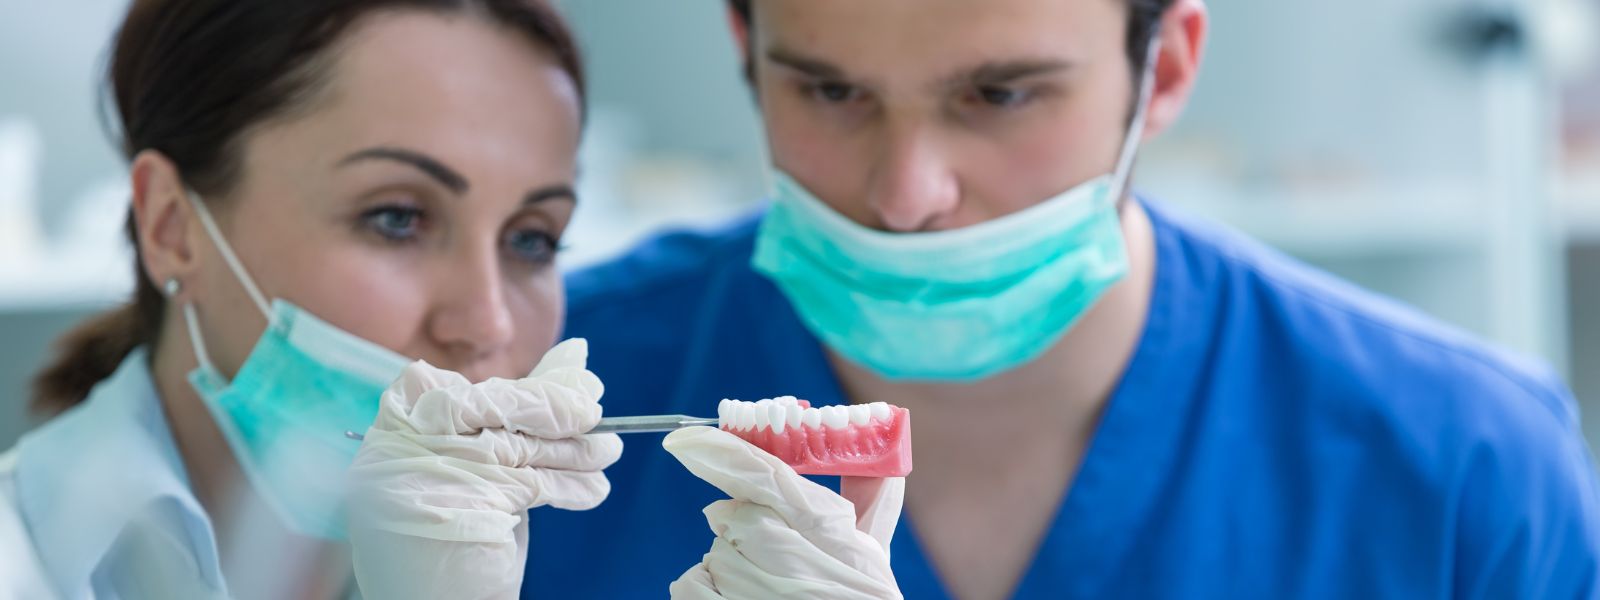 Examining implants by dentists